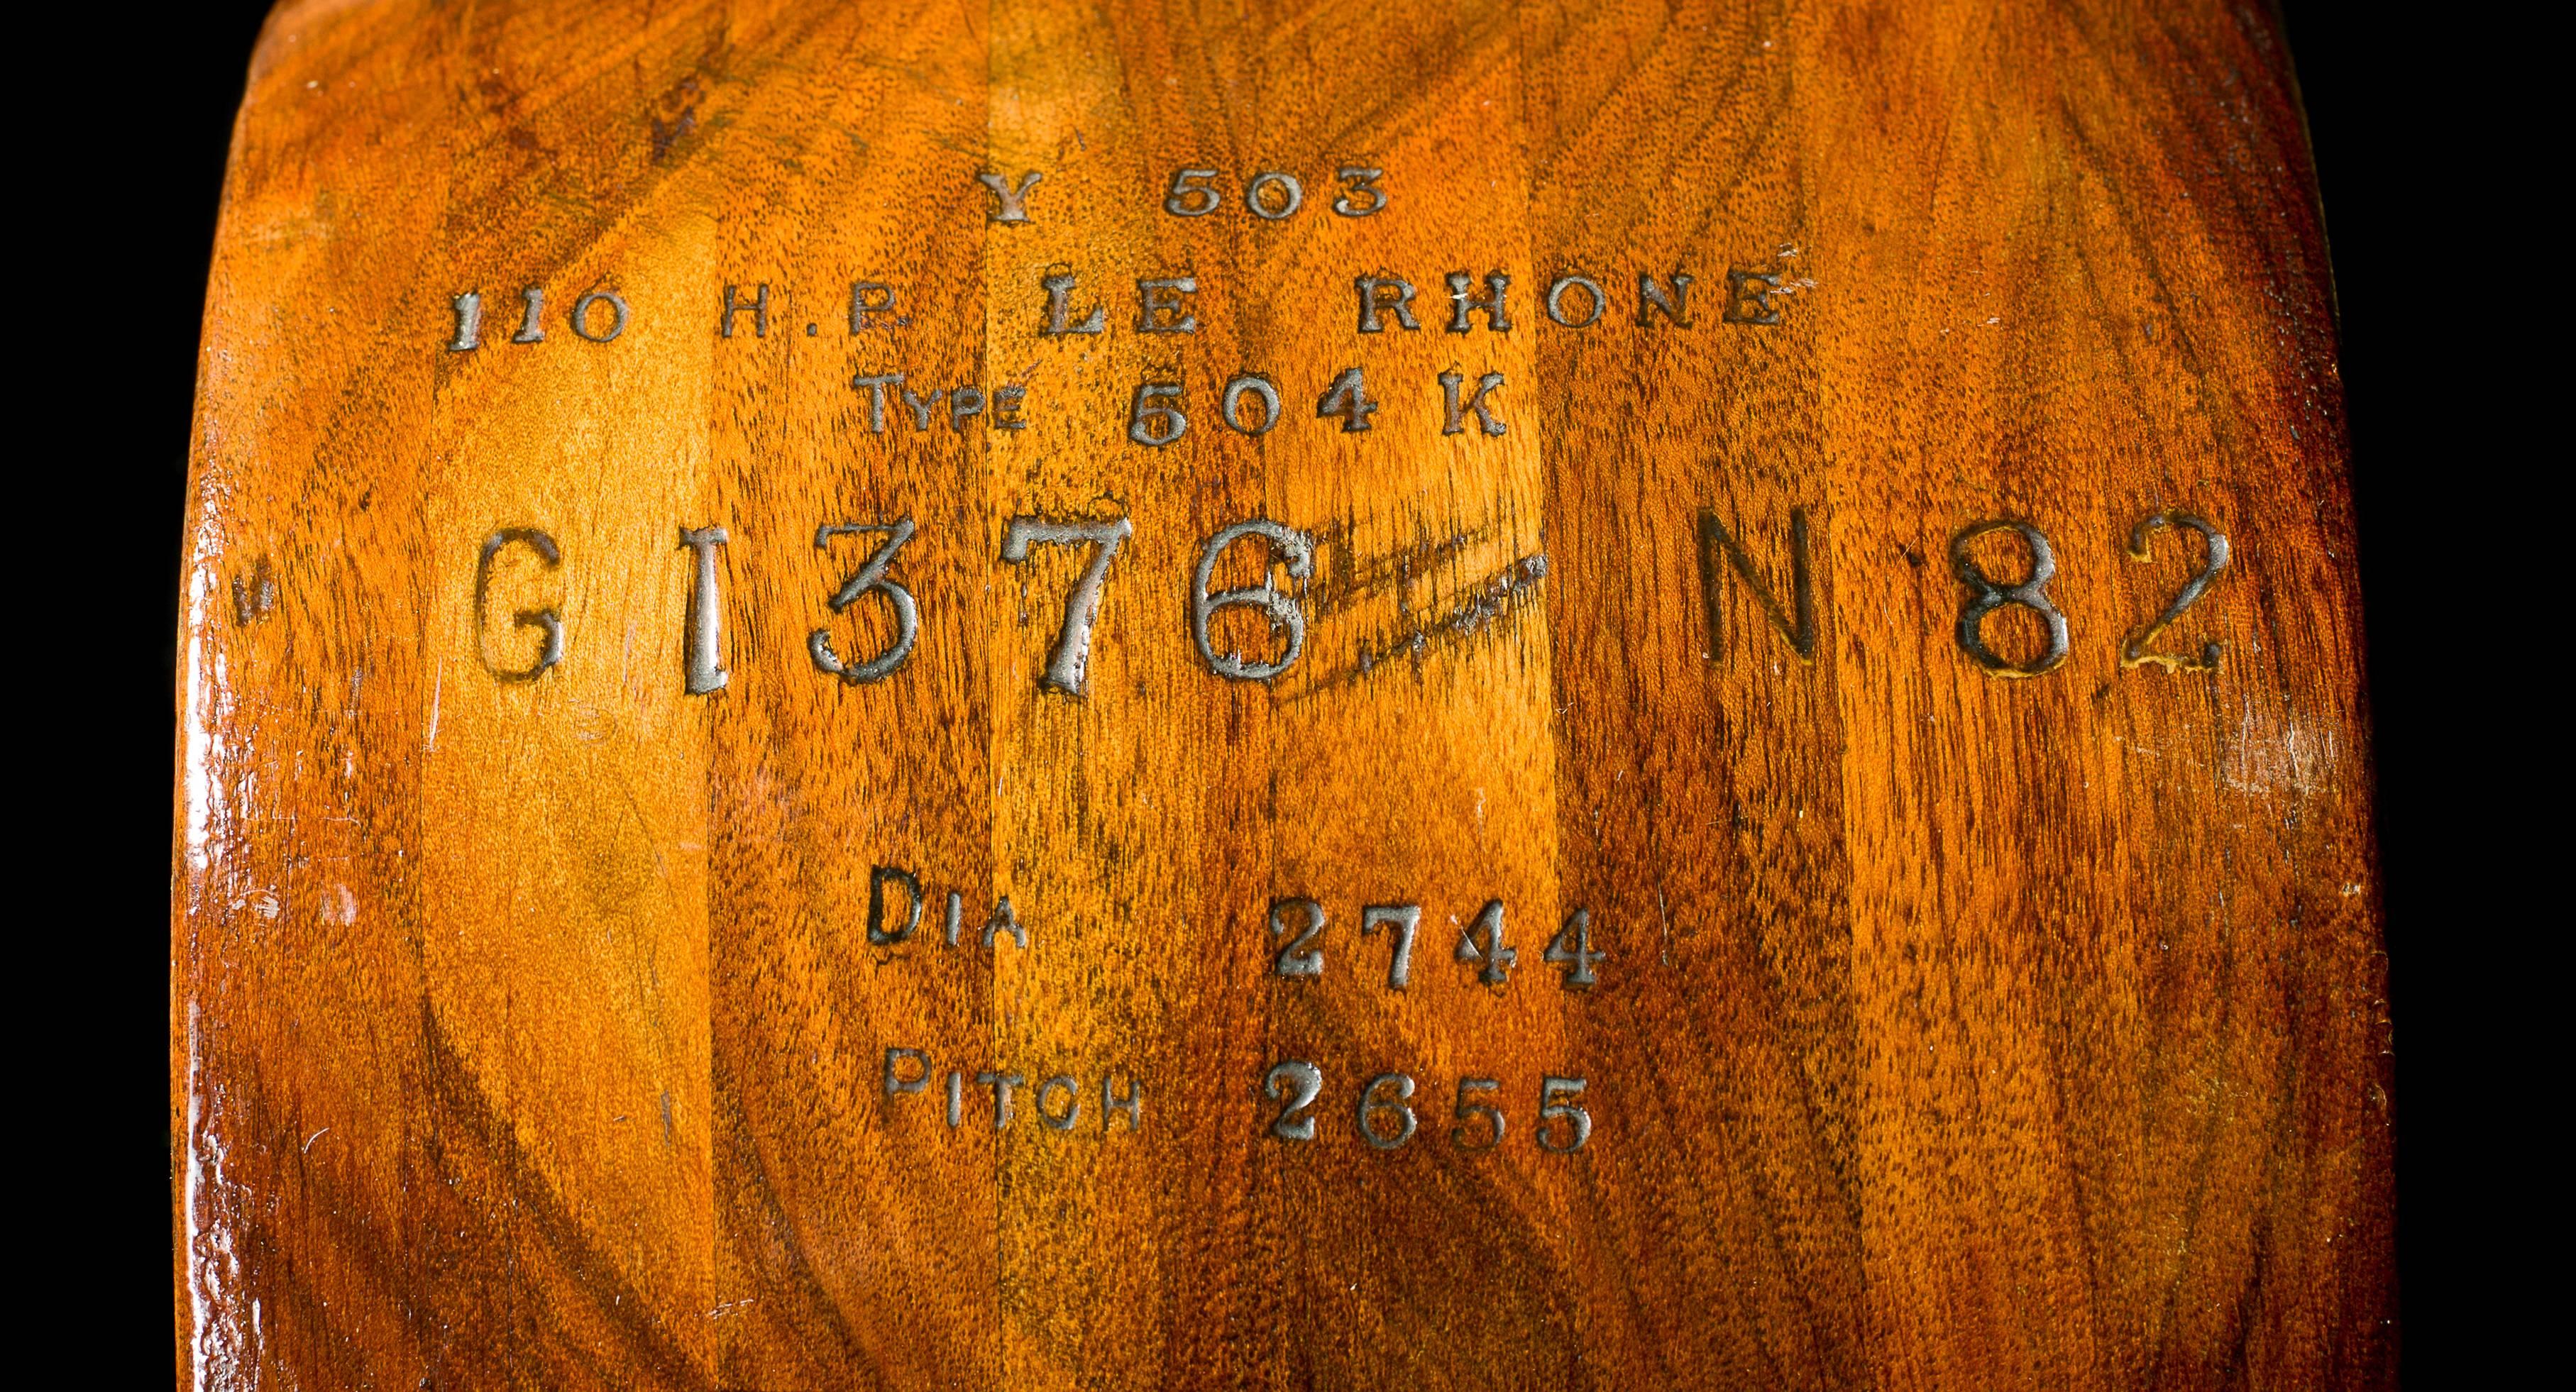 A historic propeller from the Le Rhone Rotary engine of an Avro 504 airplane. This fine early, large laminated, mahogany and oak propeller, made circa 1919 bears identification stamps indicating its British Air Ministry registration, and technical